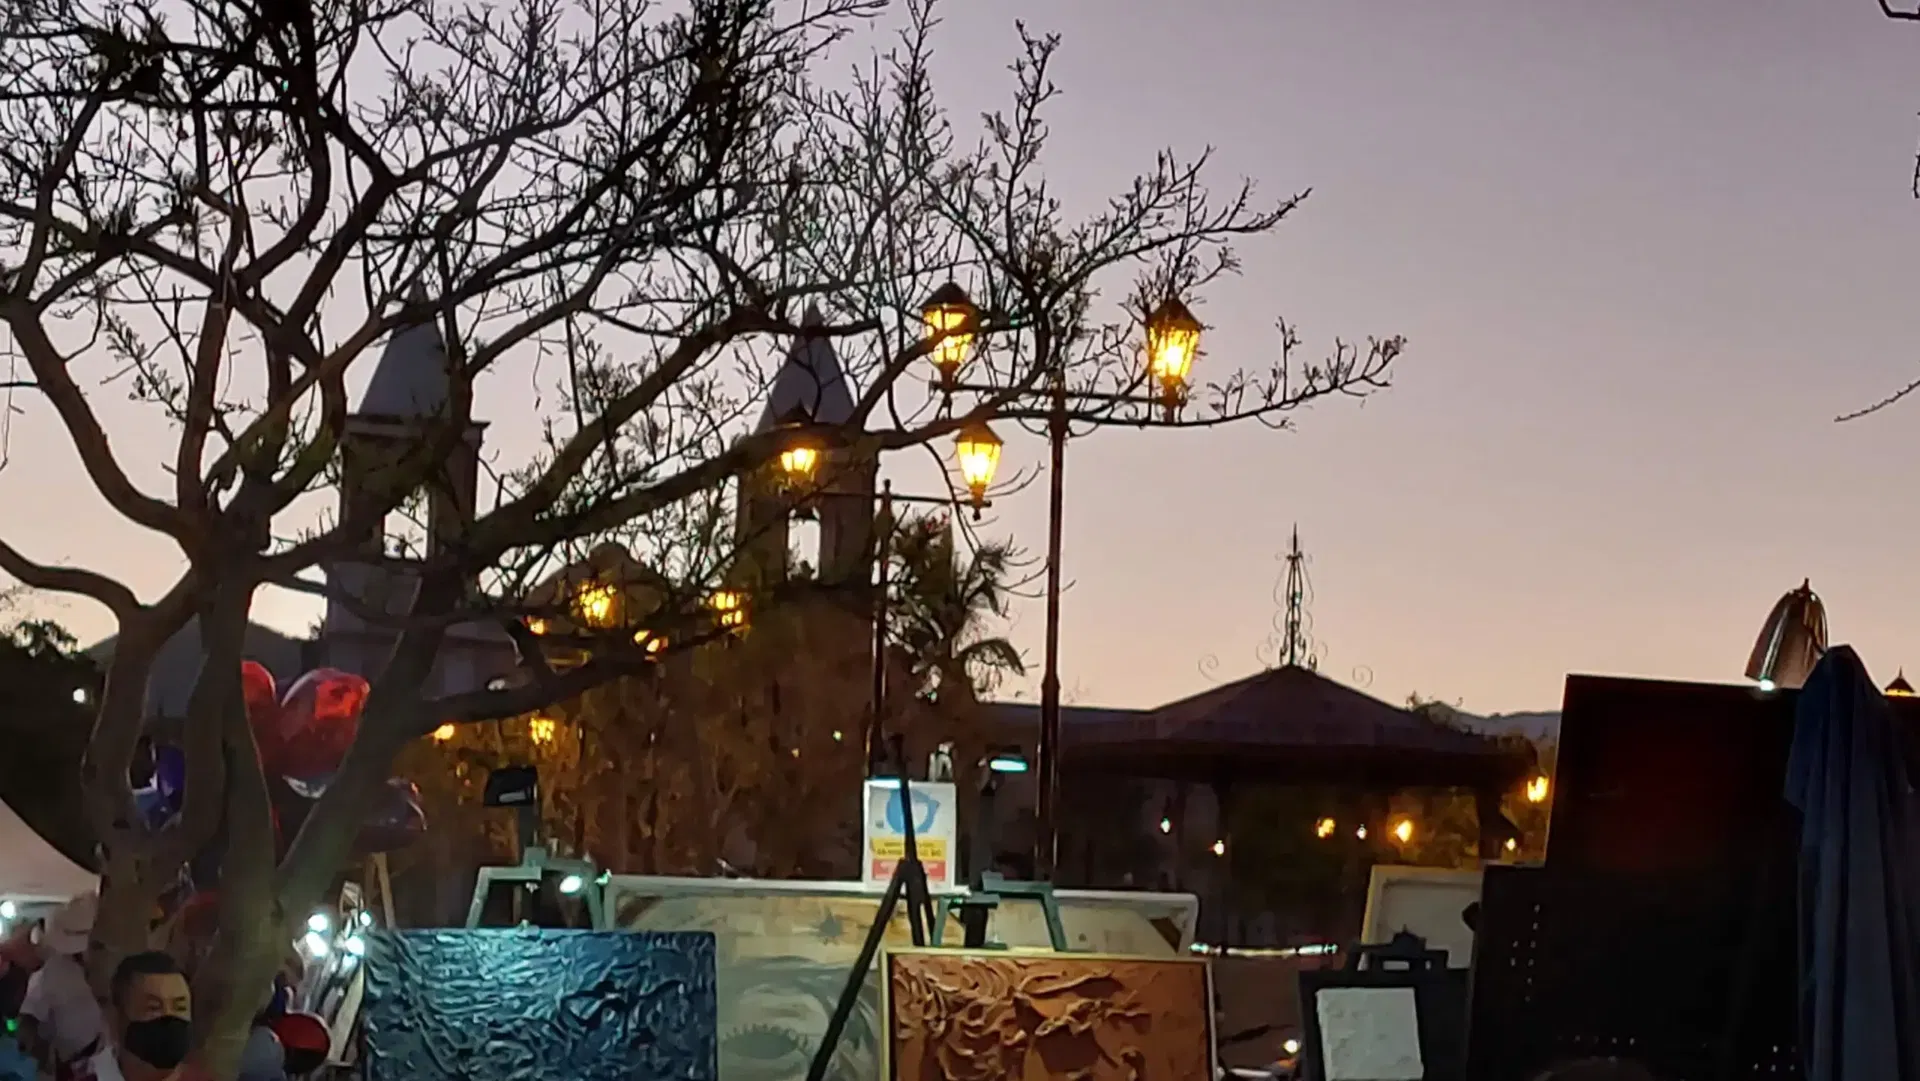 sunset at san jose del cabo downtown with the misión church at the background with paintings from artwalk events.